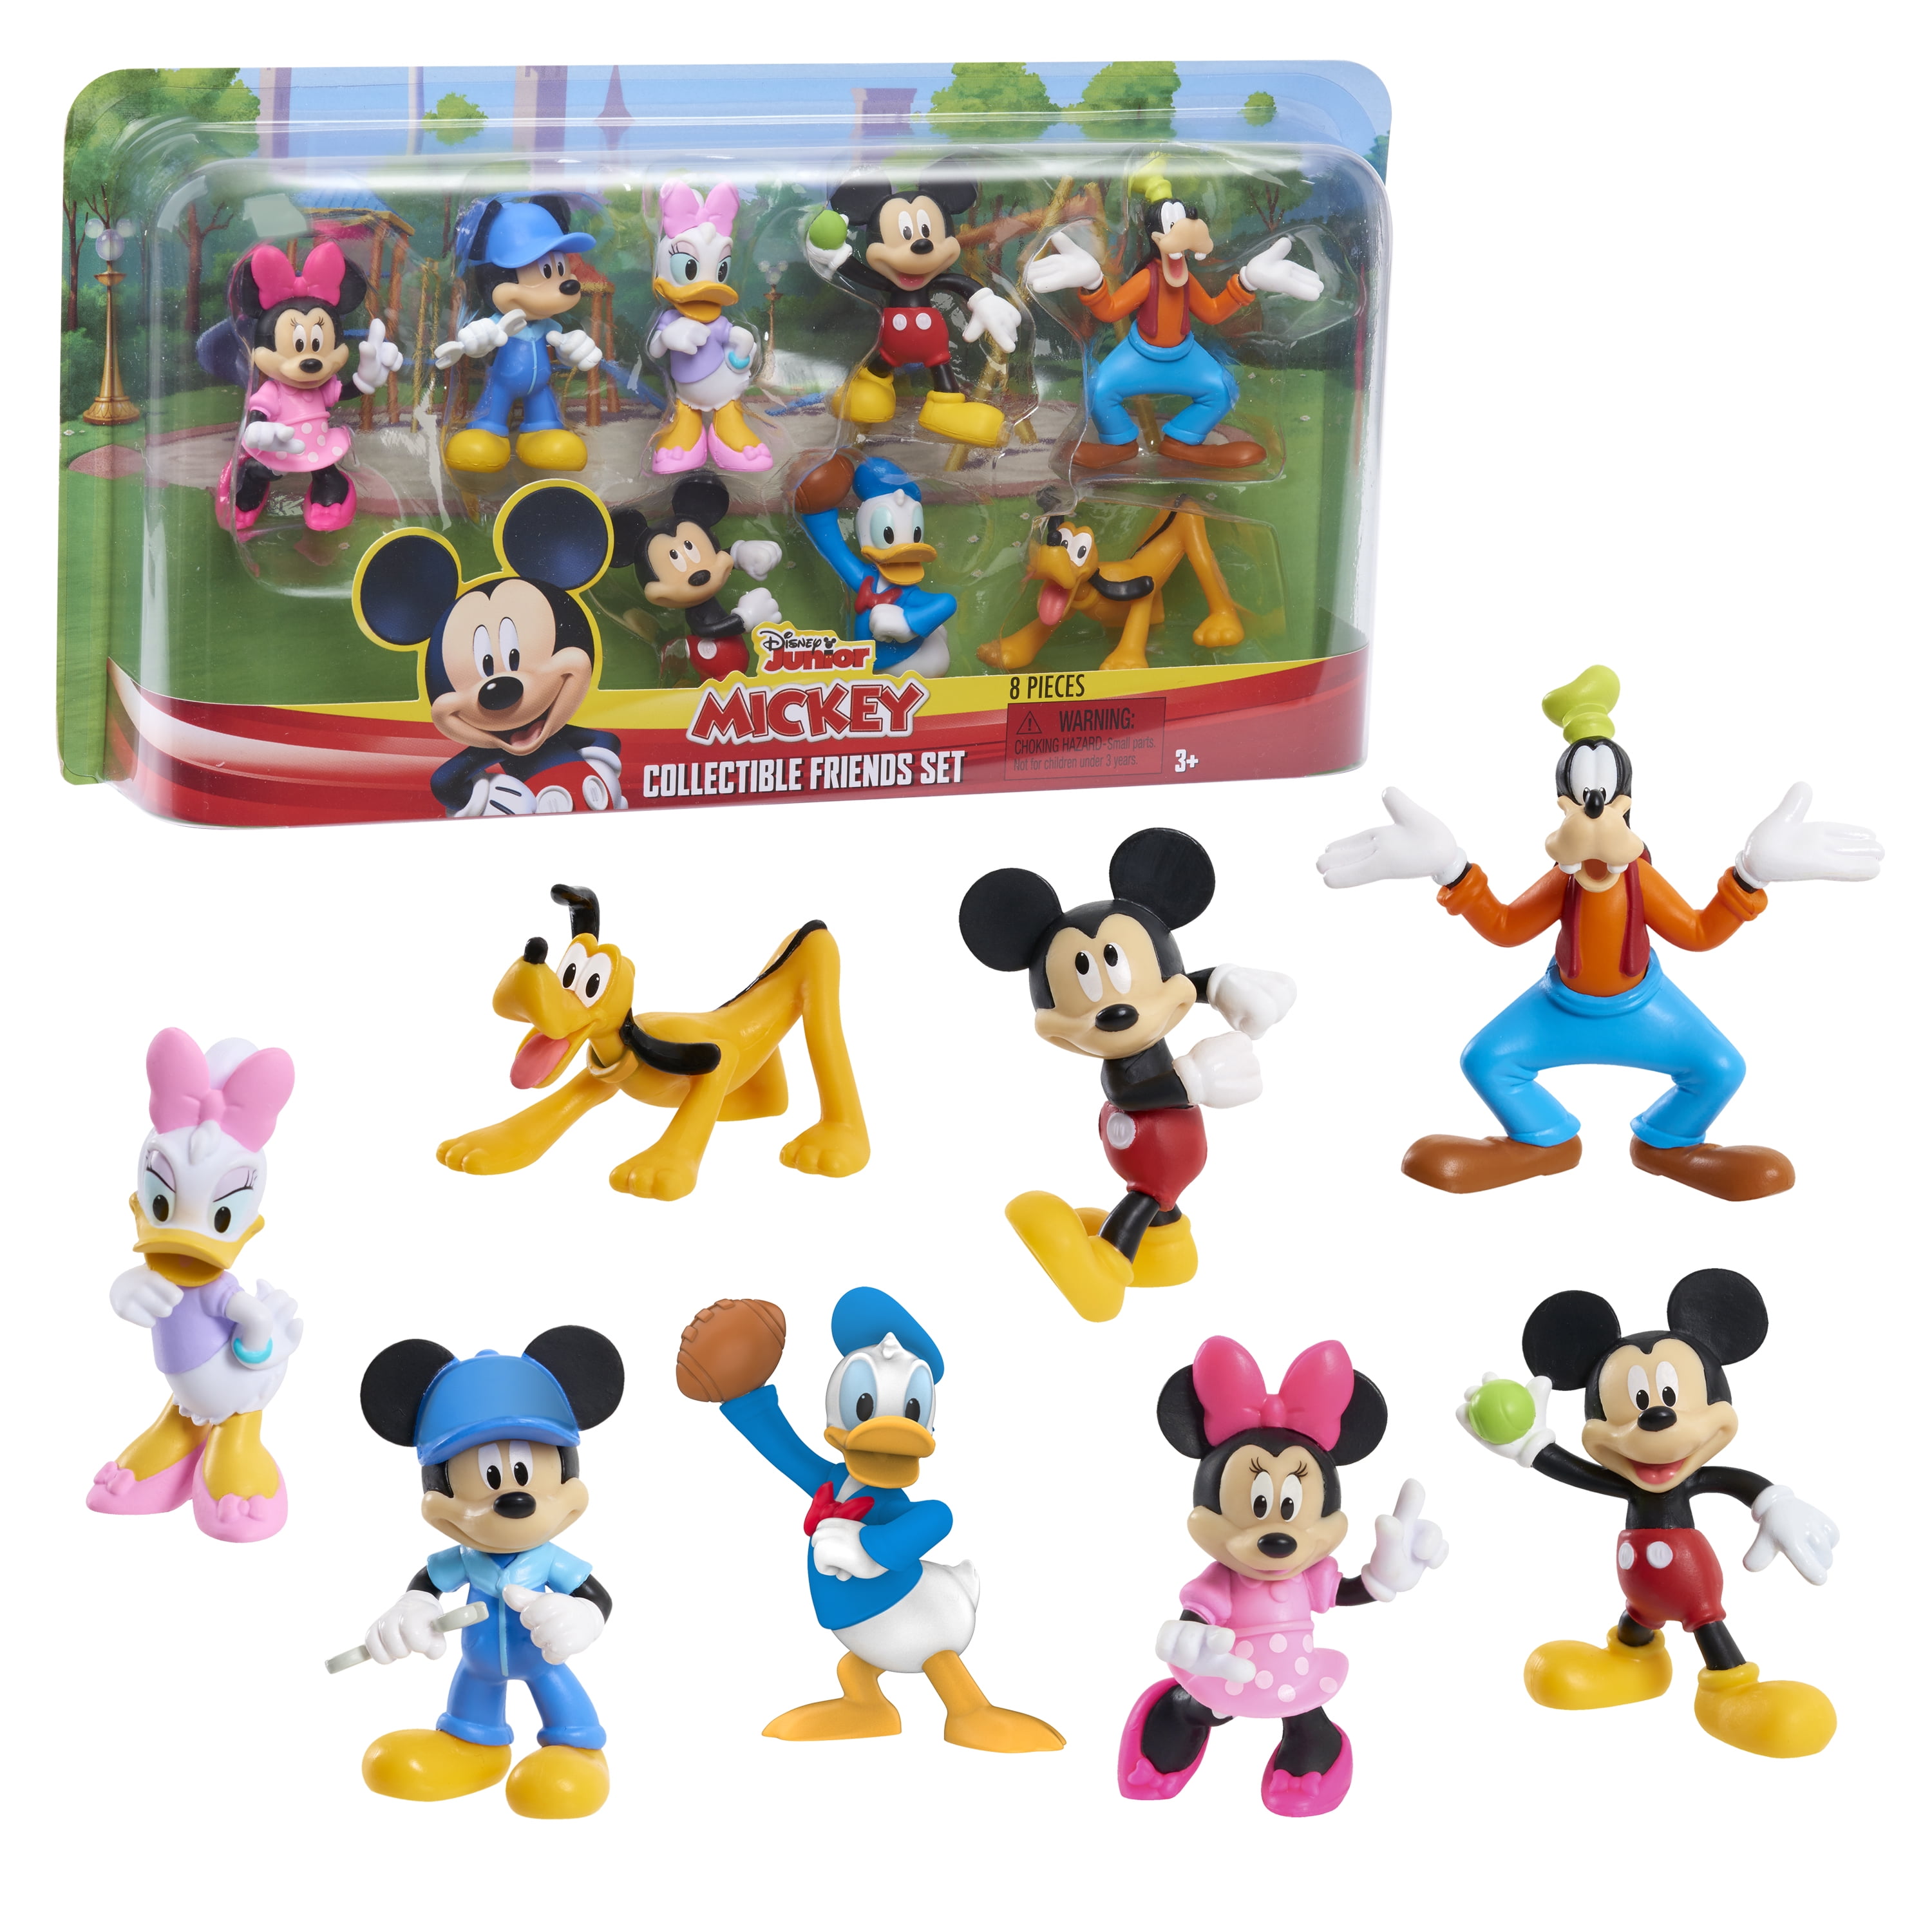 Disney Junior Surprise Play Pack Grab and Go Collectible Character Activity Set for sale online 